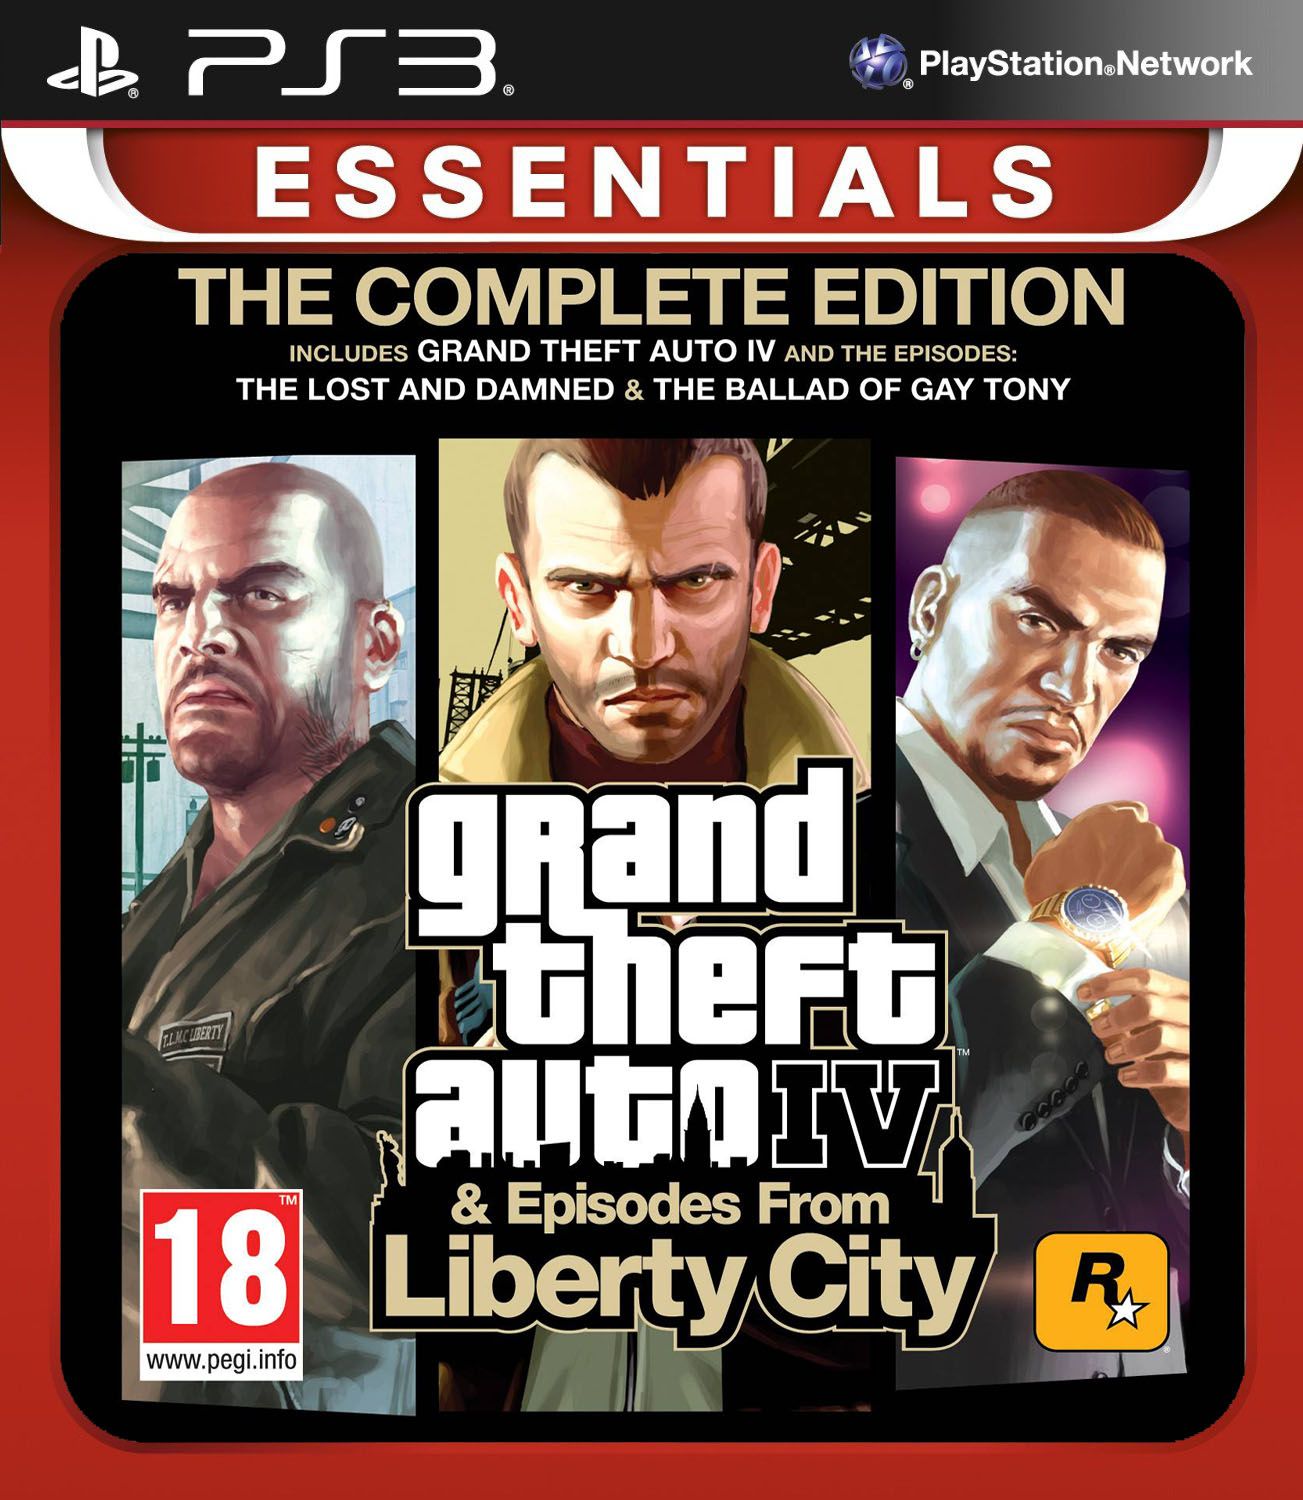 gta episodes from liberty city ps3